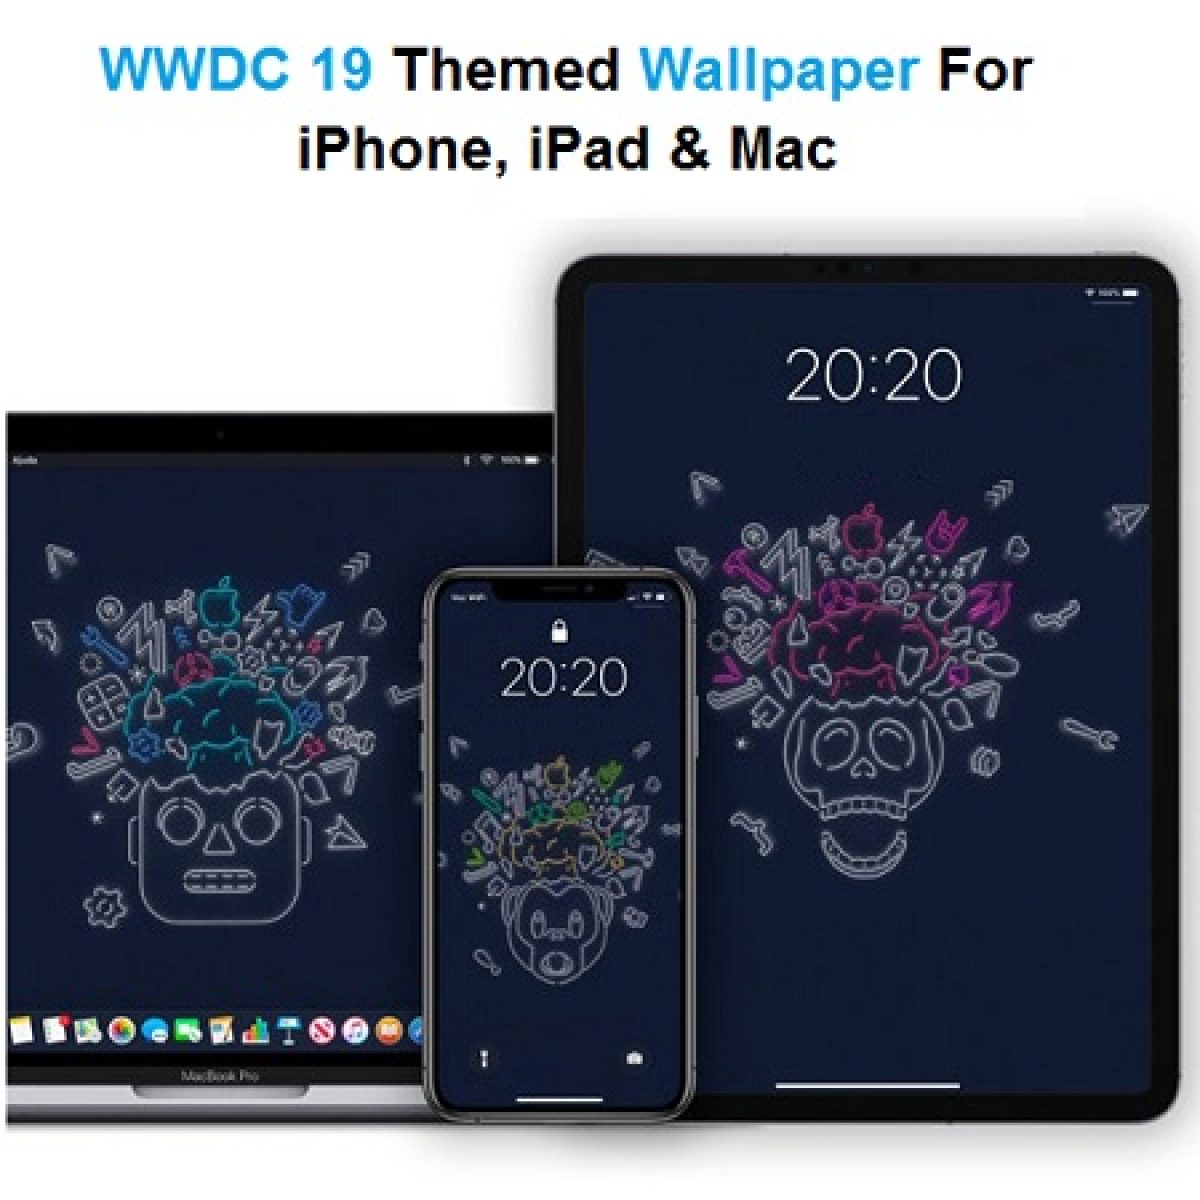 Download The WWDC 2019 Dark Mode Themed Wallpapers For iPhone, iPad And Mac